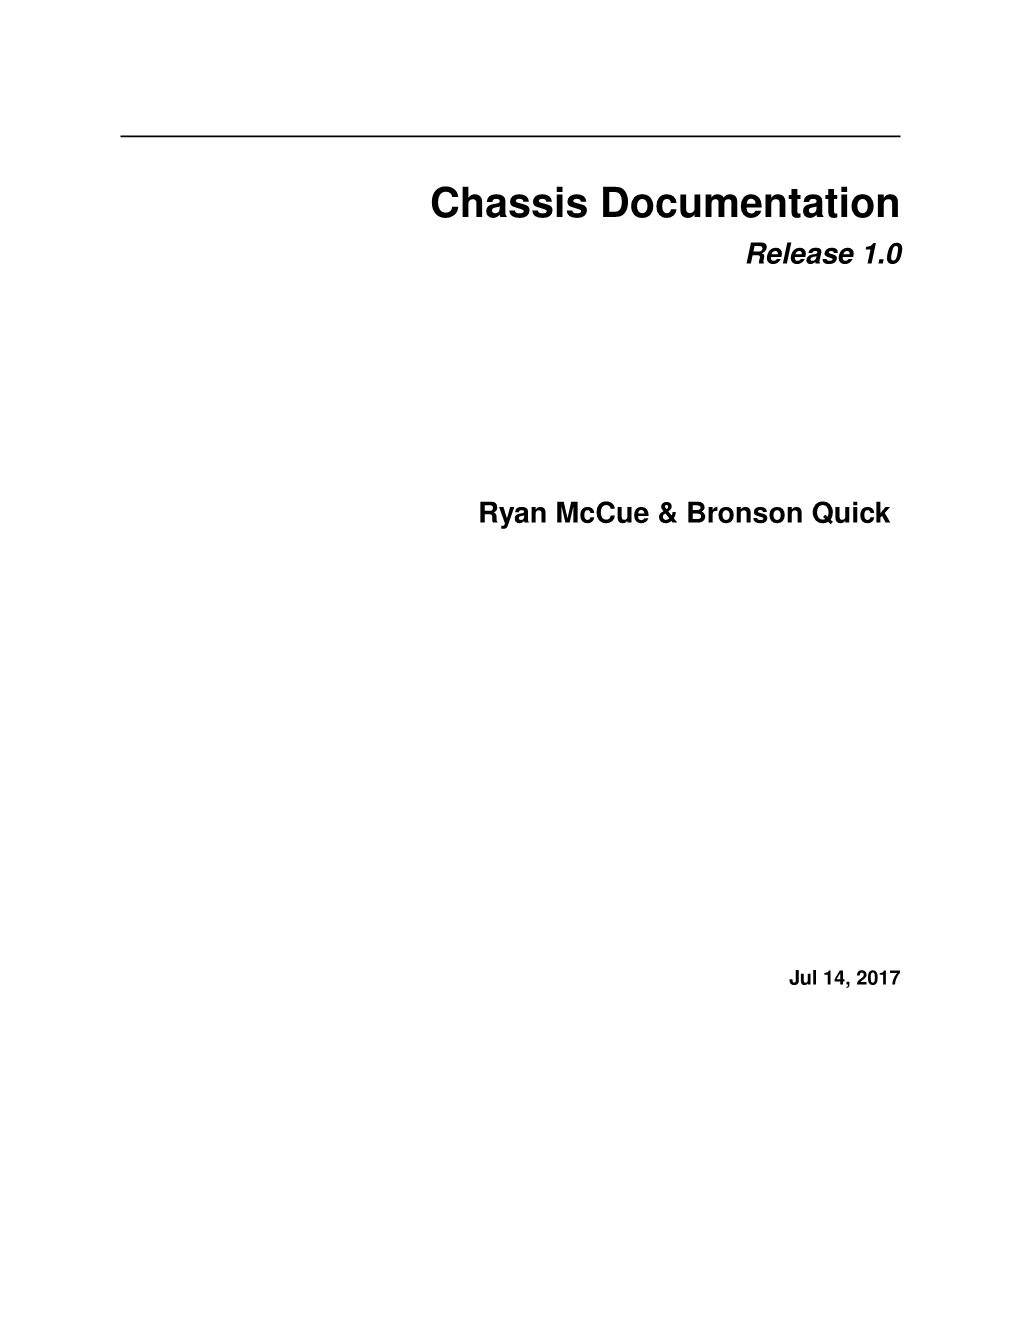 Chassis Documentation Release 1.0